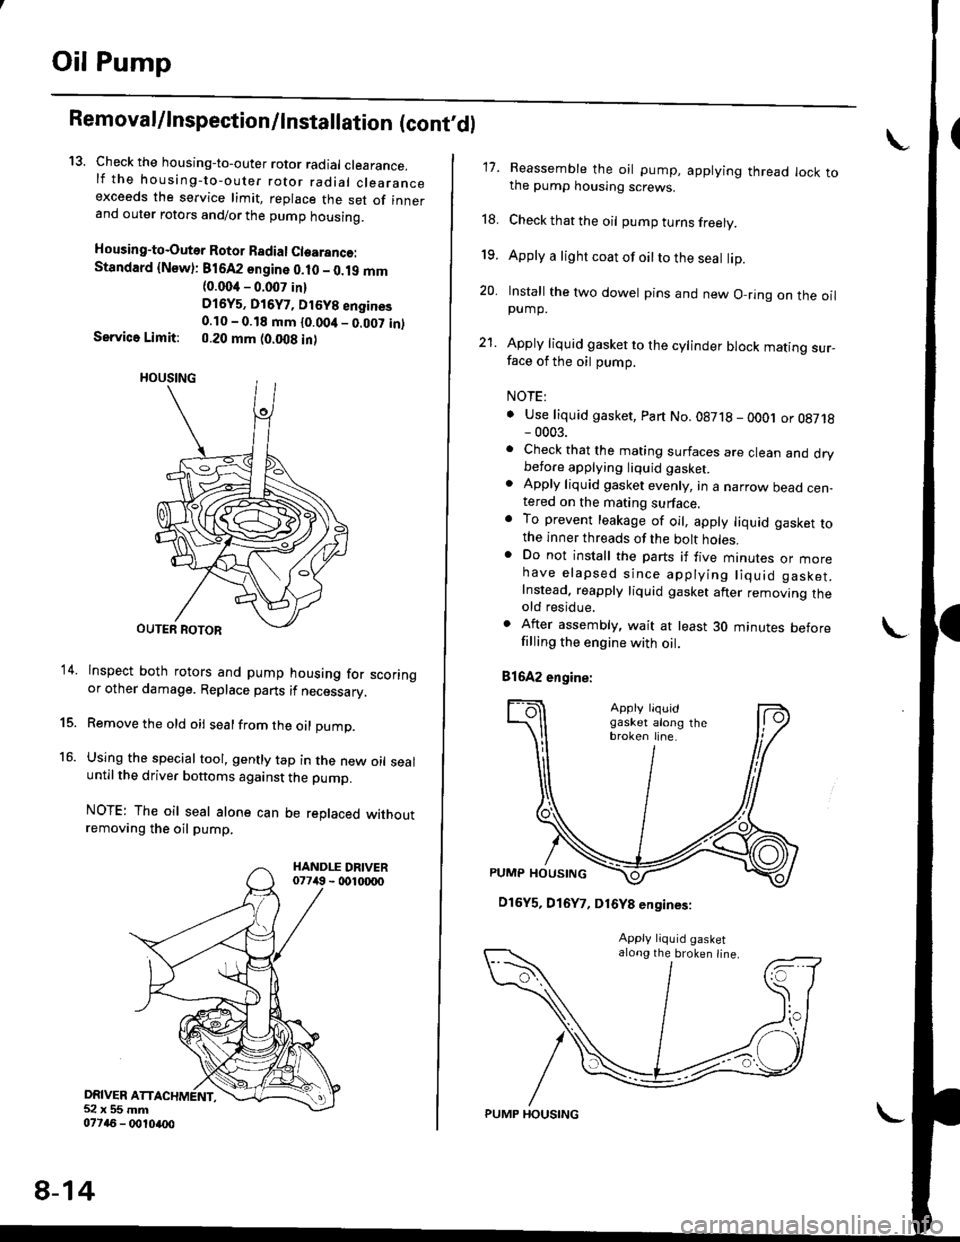 HONDA CIVIC 1999 6.G Workshop Manual Oil Pump
RemovaUlnspection/lnstallation (contdl
13. Check the housing-to-outer rotor radial clearance.lf the housing-to-outer rotor radial clearanceexceeds the service limit, replace the set of inner